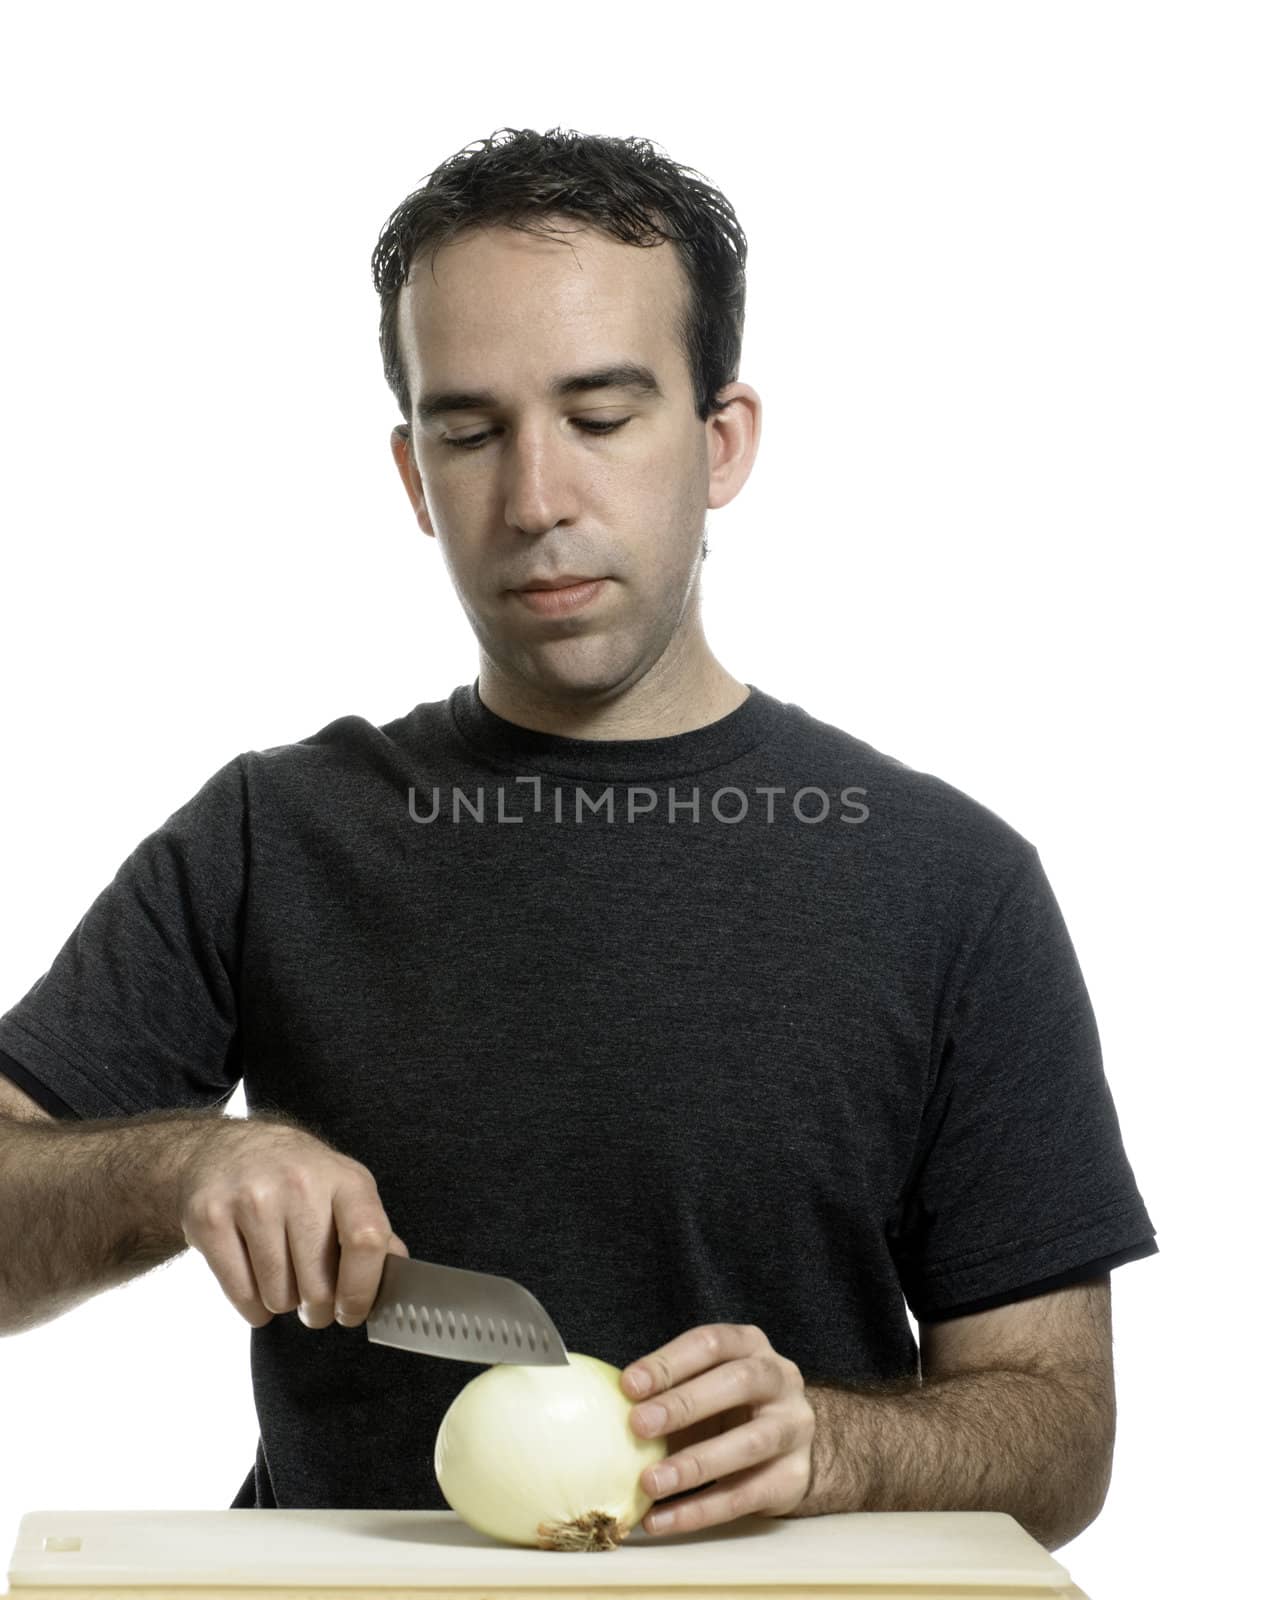 A young man cutting an onion with a sharp knife, isolated against a white background